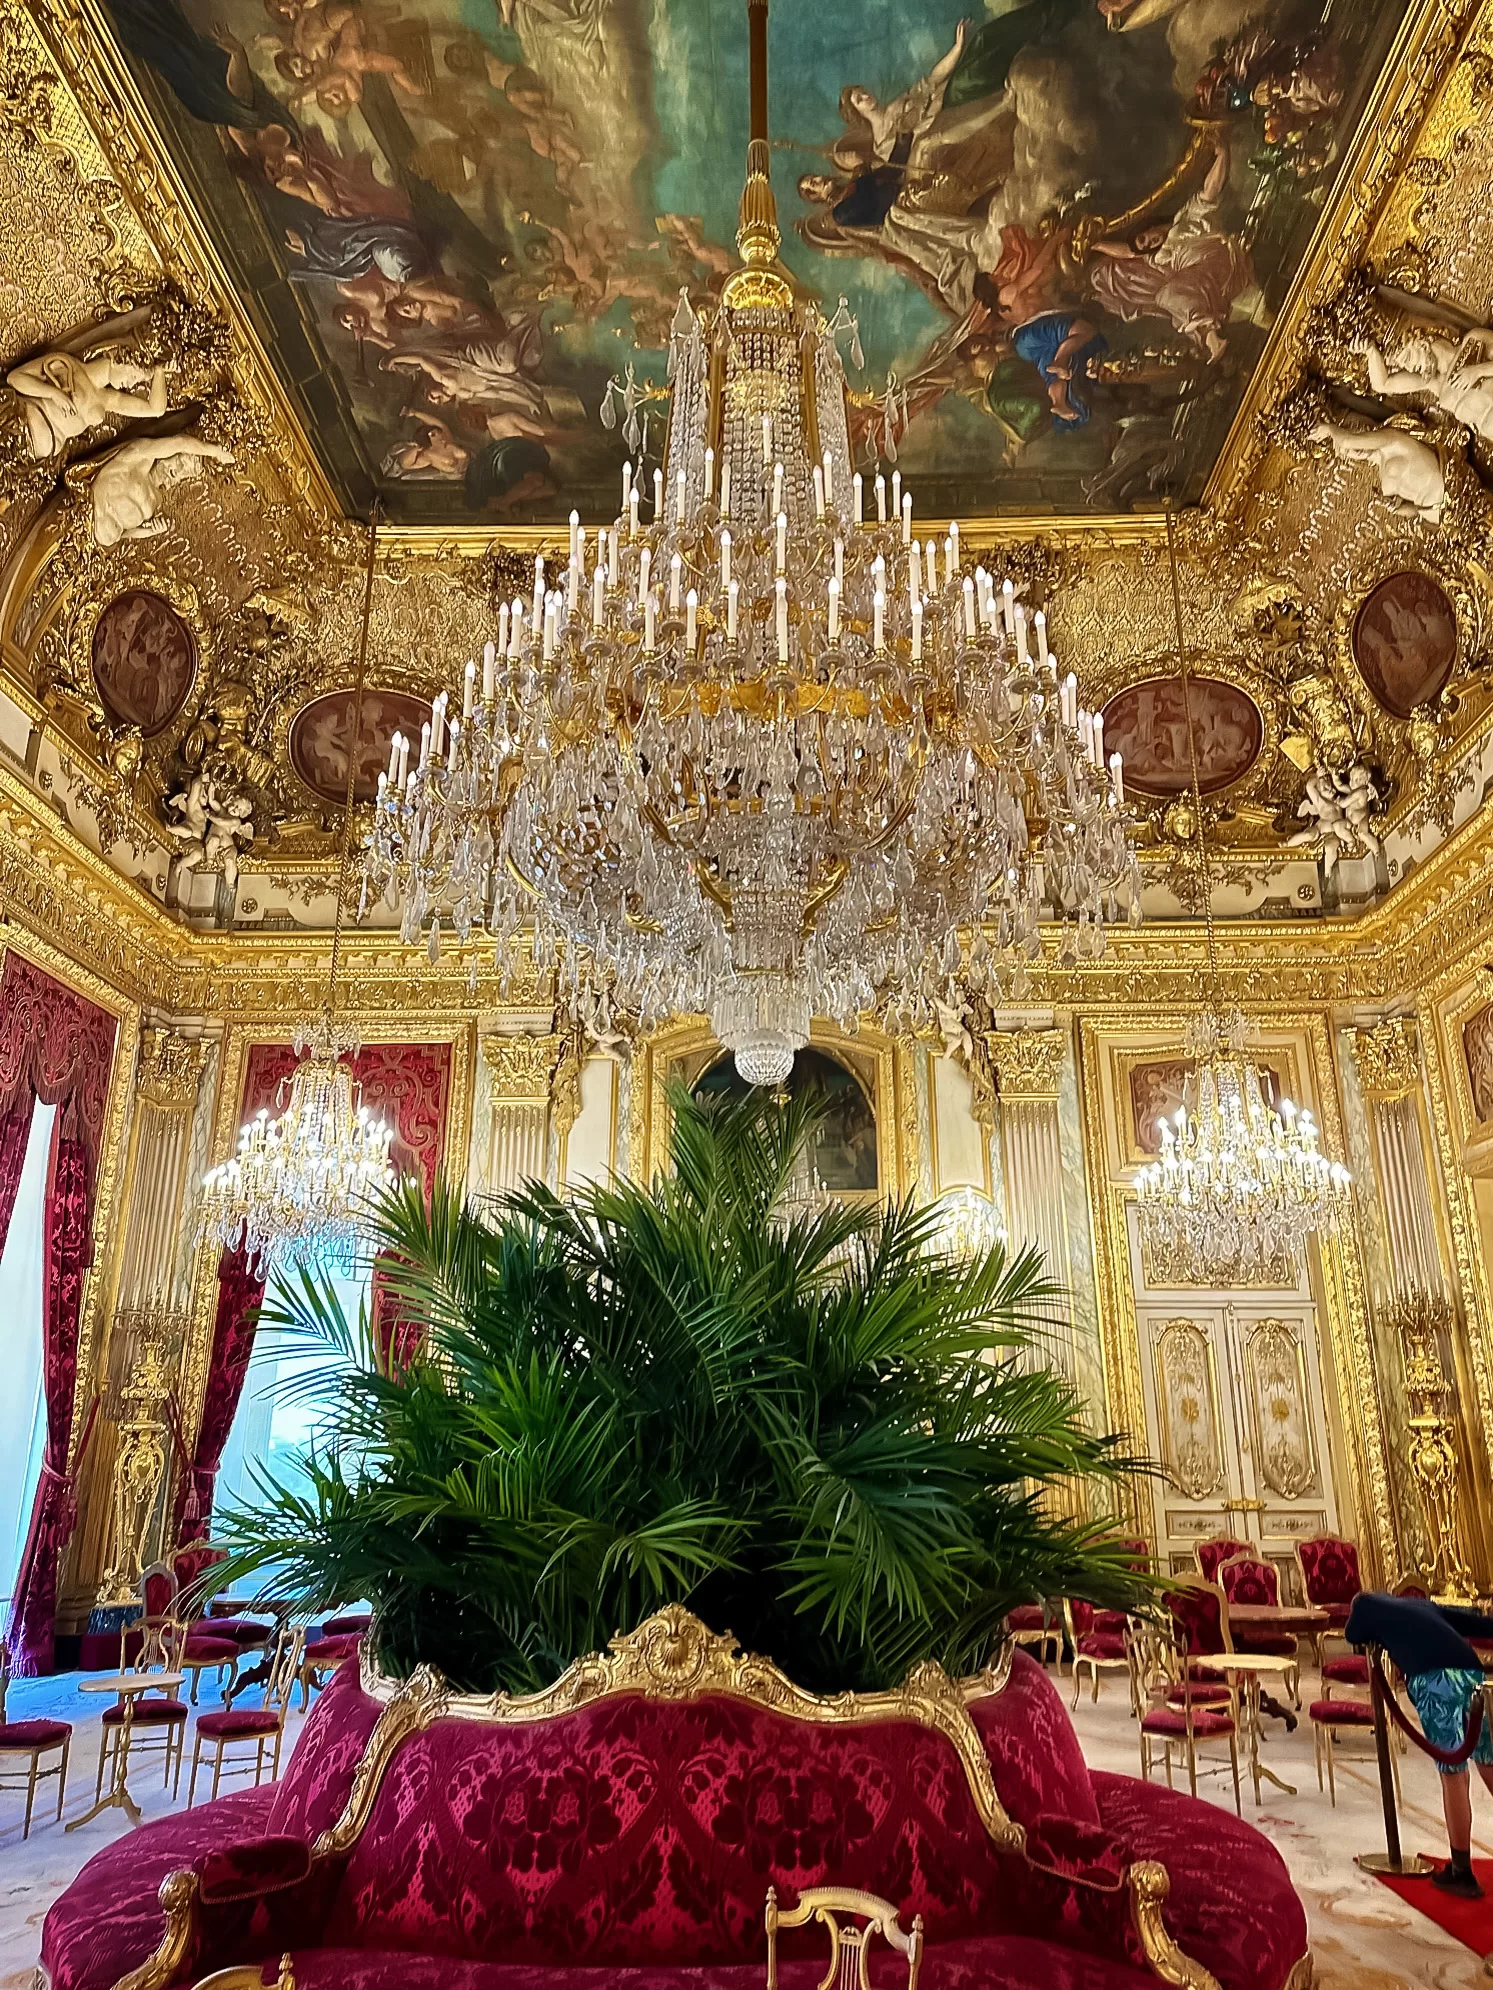 Napoleons rooms at the Louvre